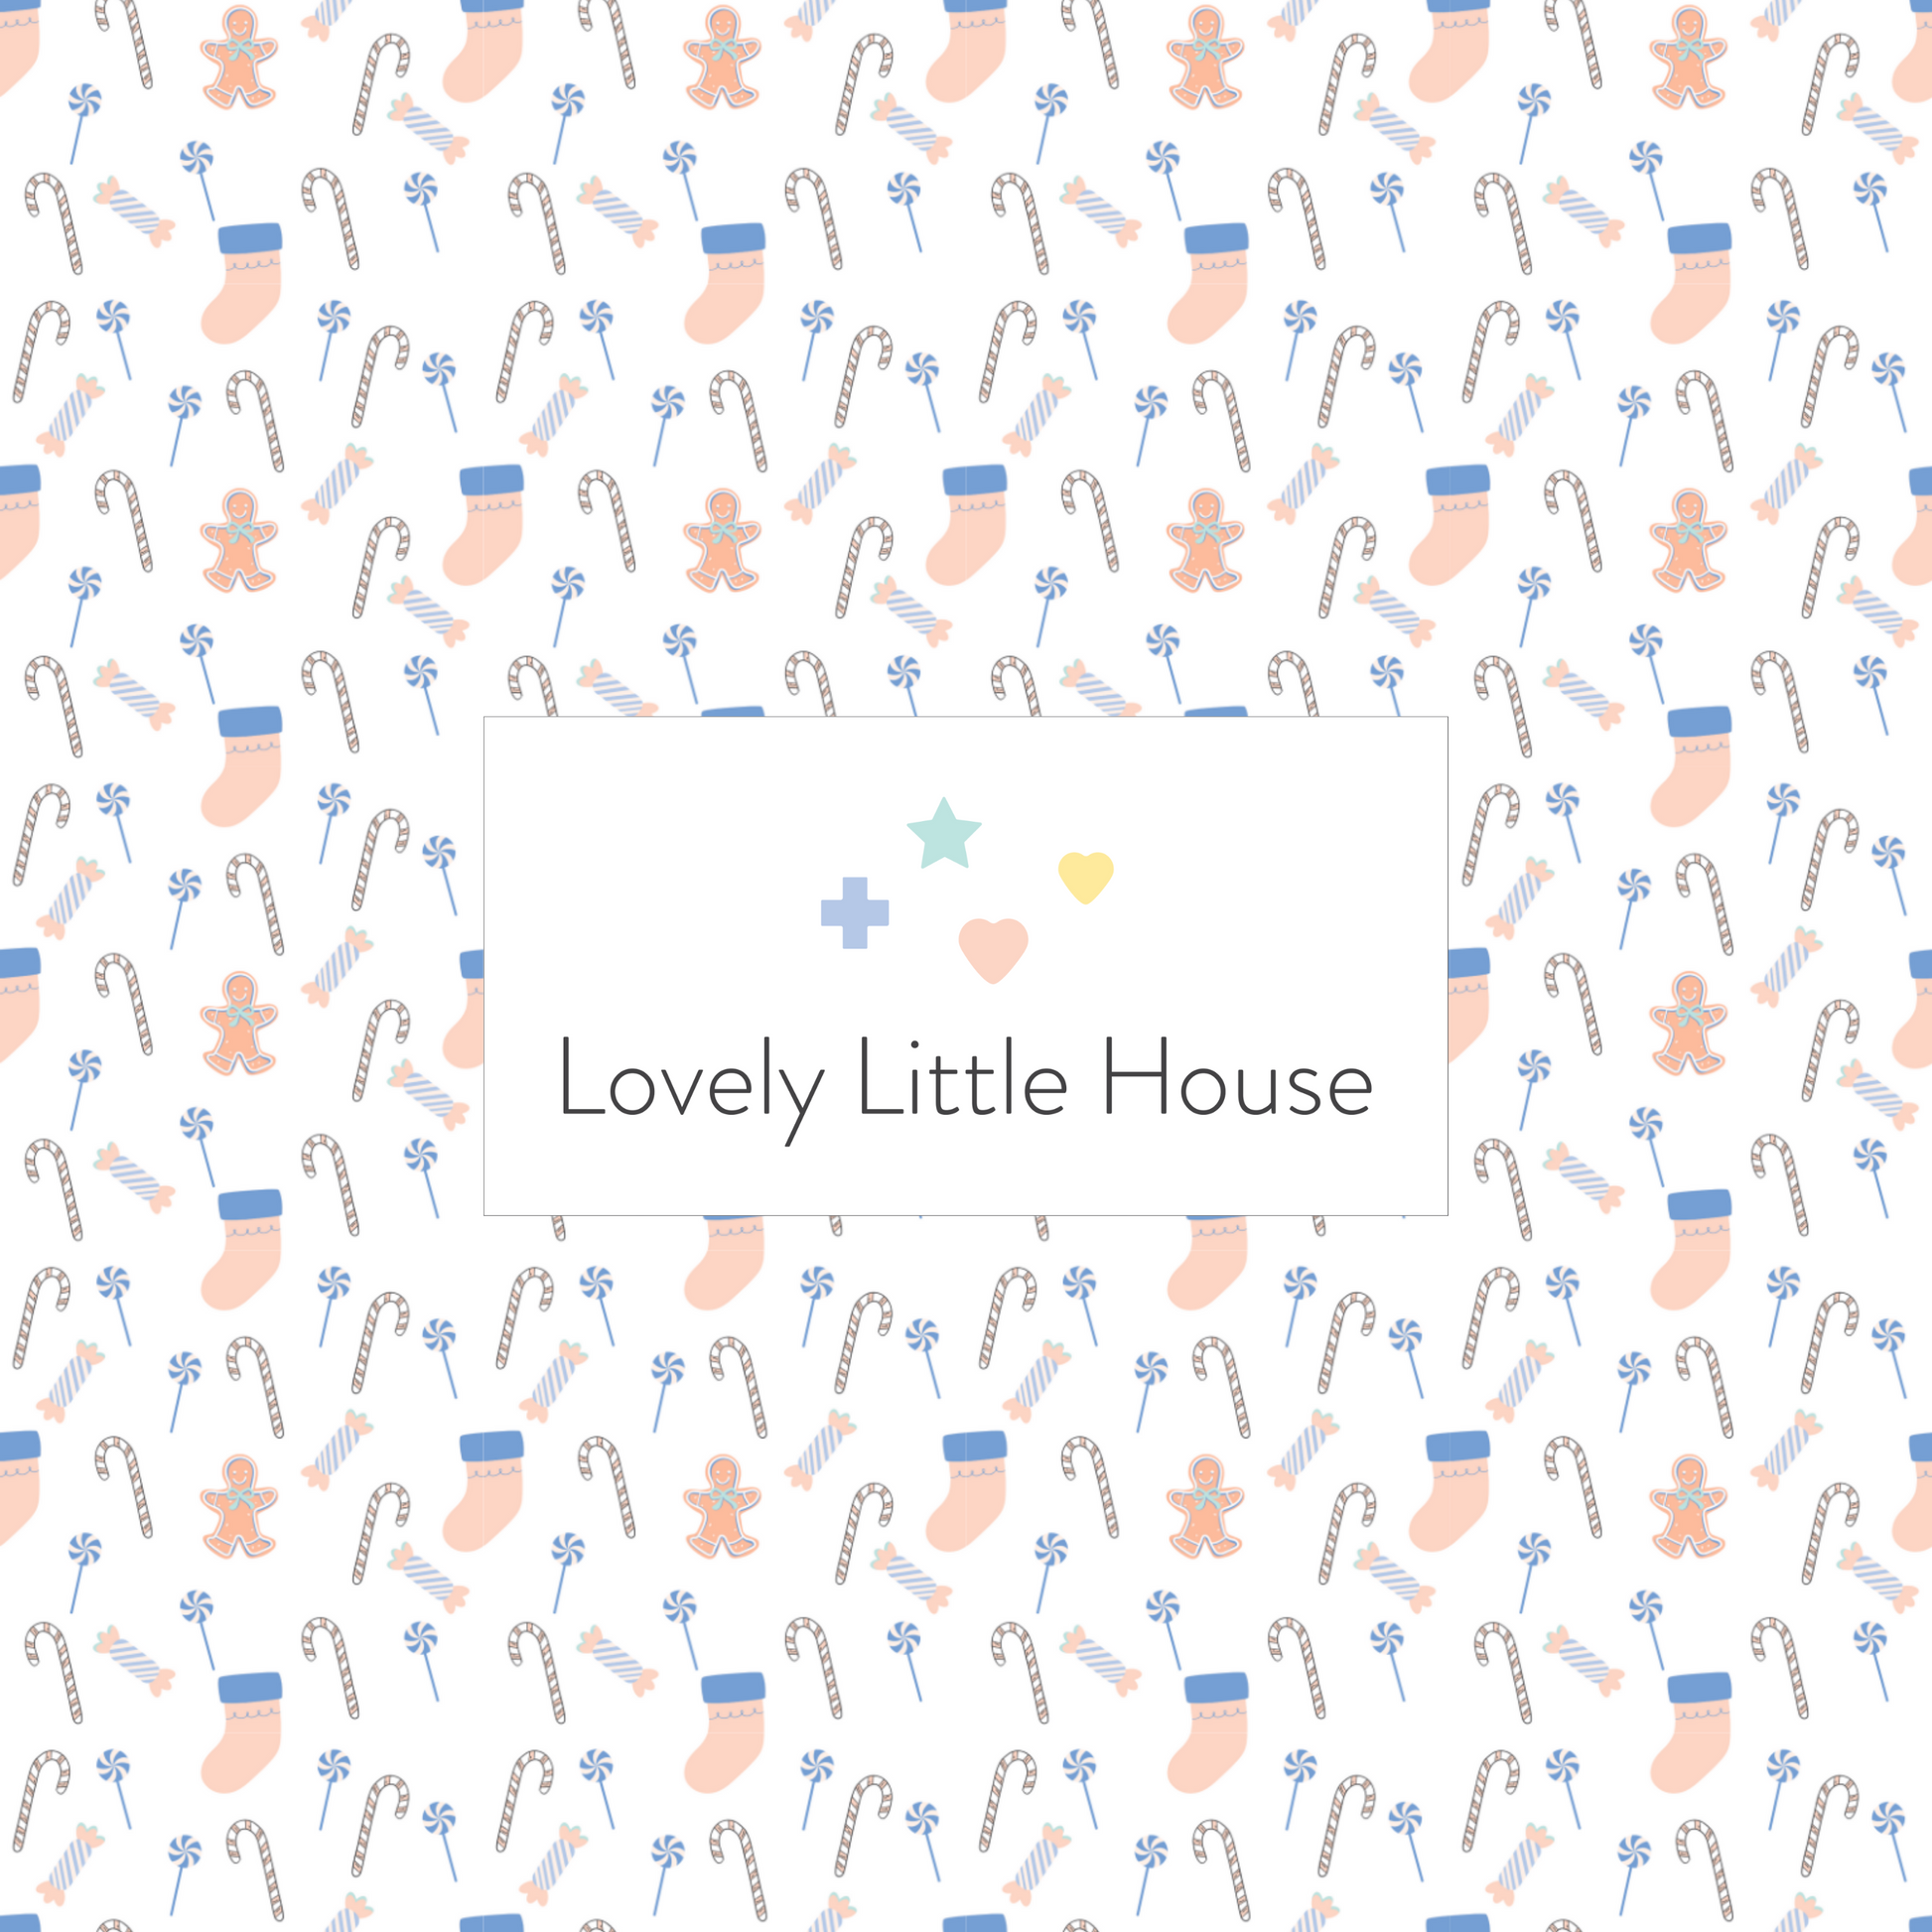 A dollhouse wallpaper pattern of stockings and Christmas candy such as candy cane and peppermint candy in pink and blue